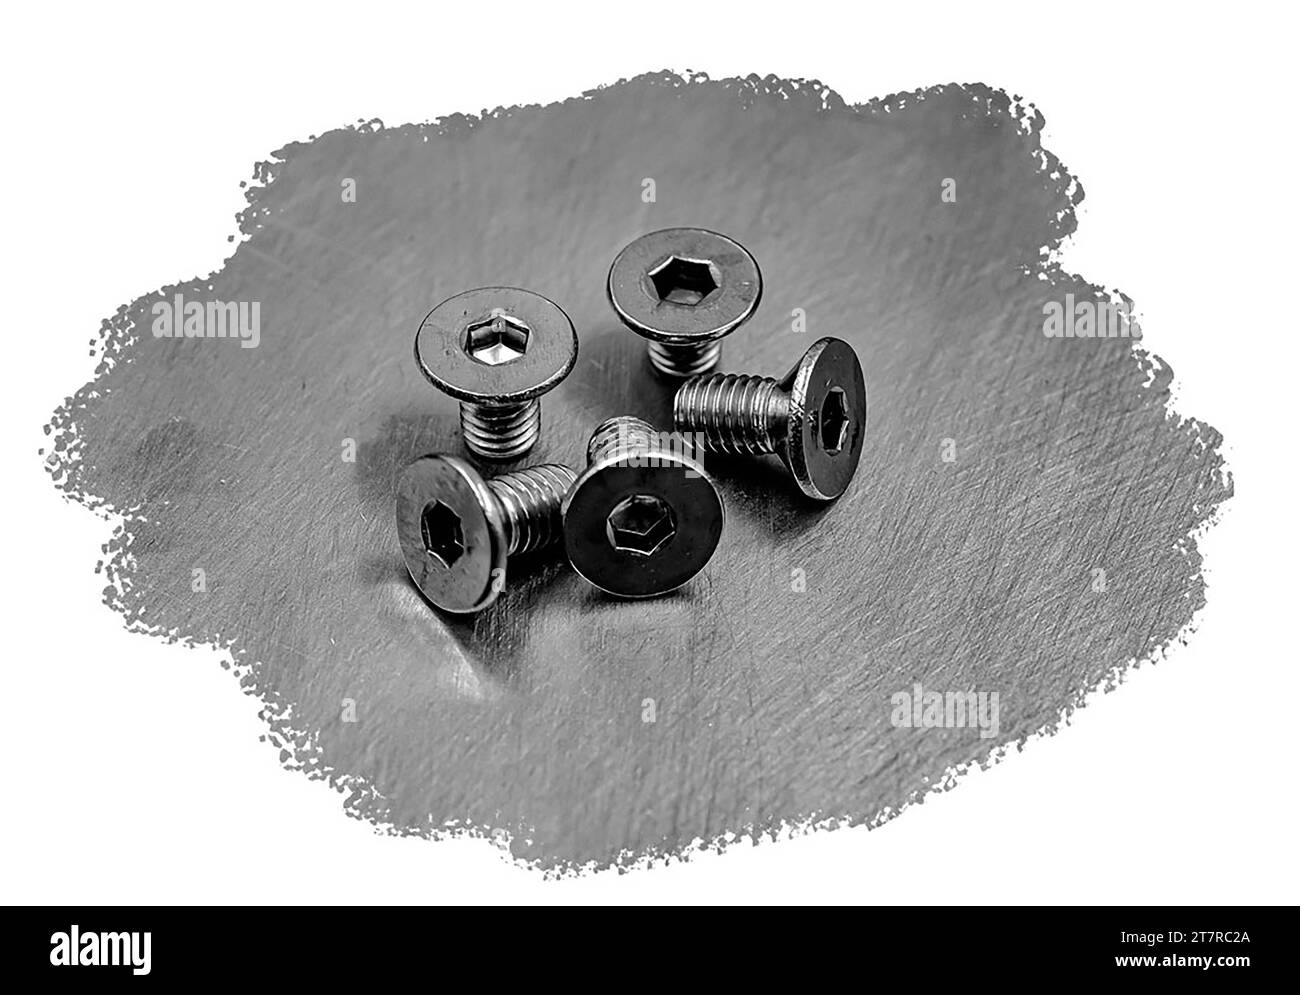 DIN 7991 stainless steel bolt close up detailed Stock Photo